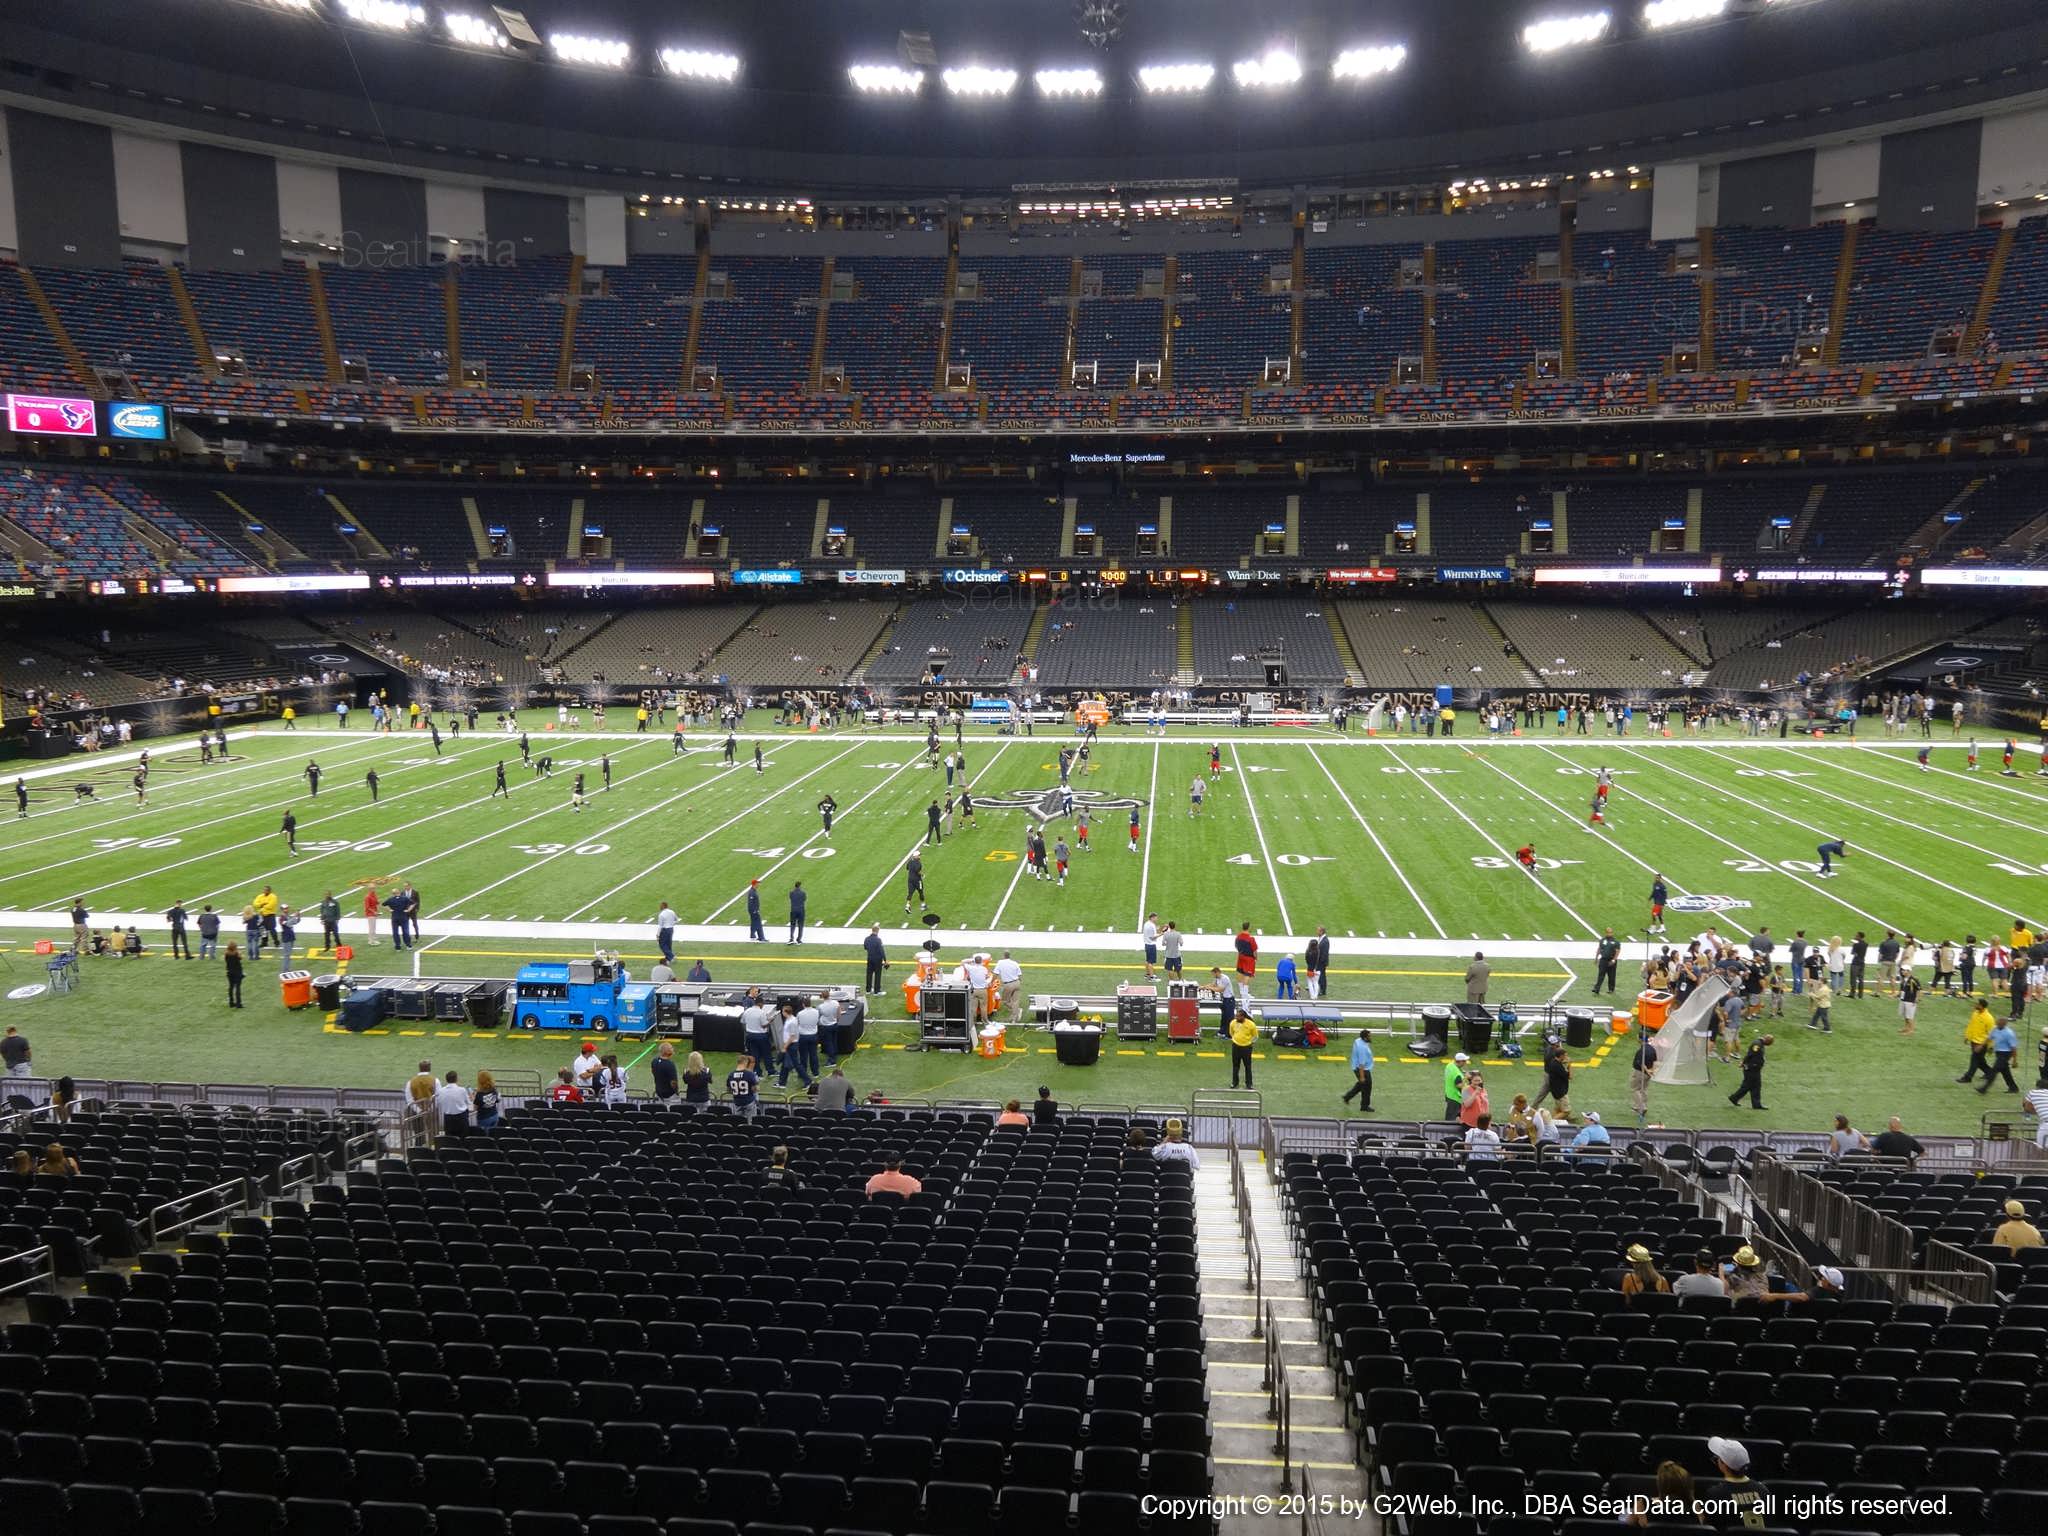 Seat view from section 221 at the Mercedes-Benz Superdome, home of the New Orleans Saints